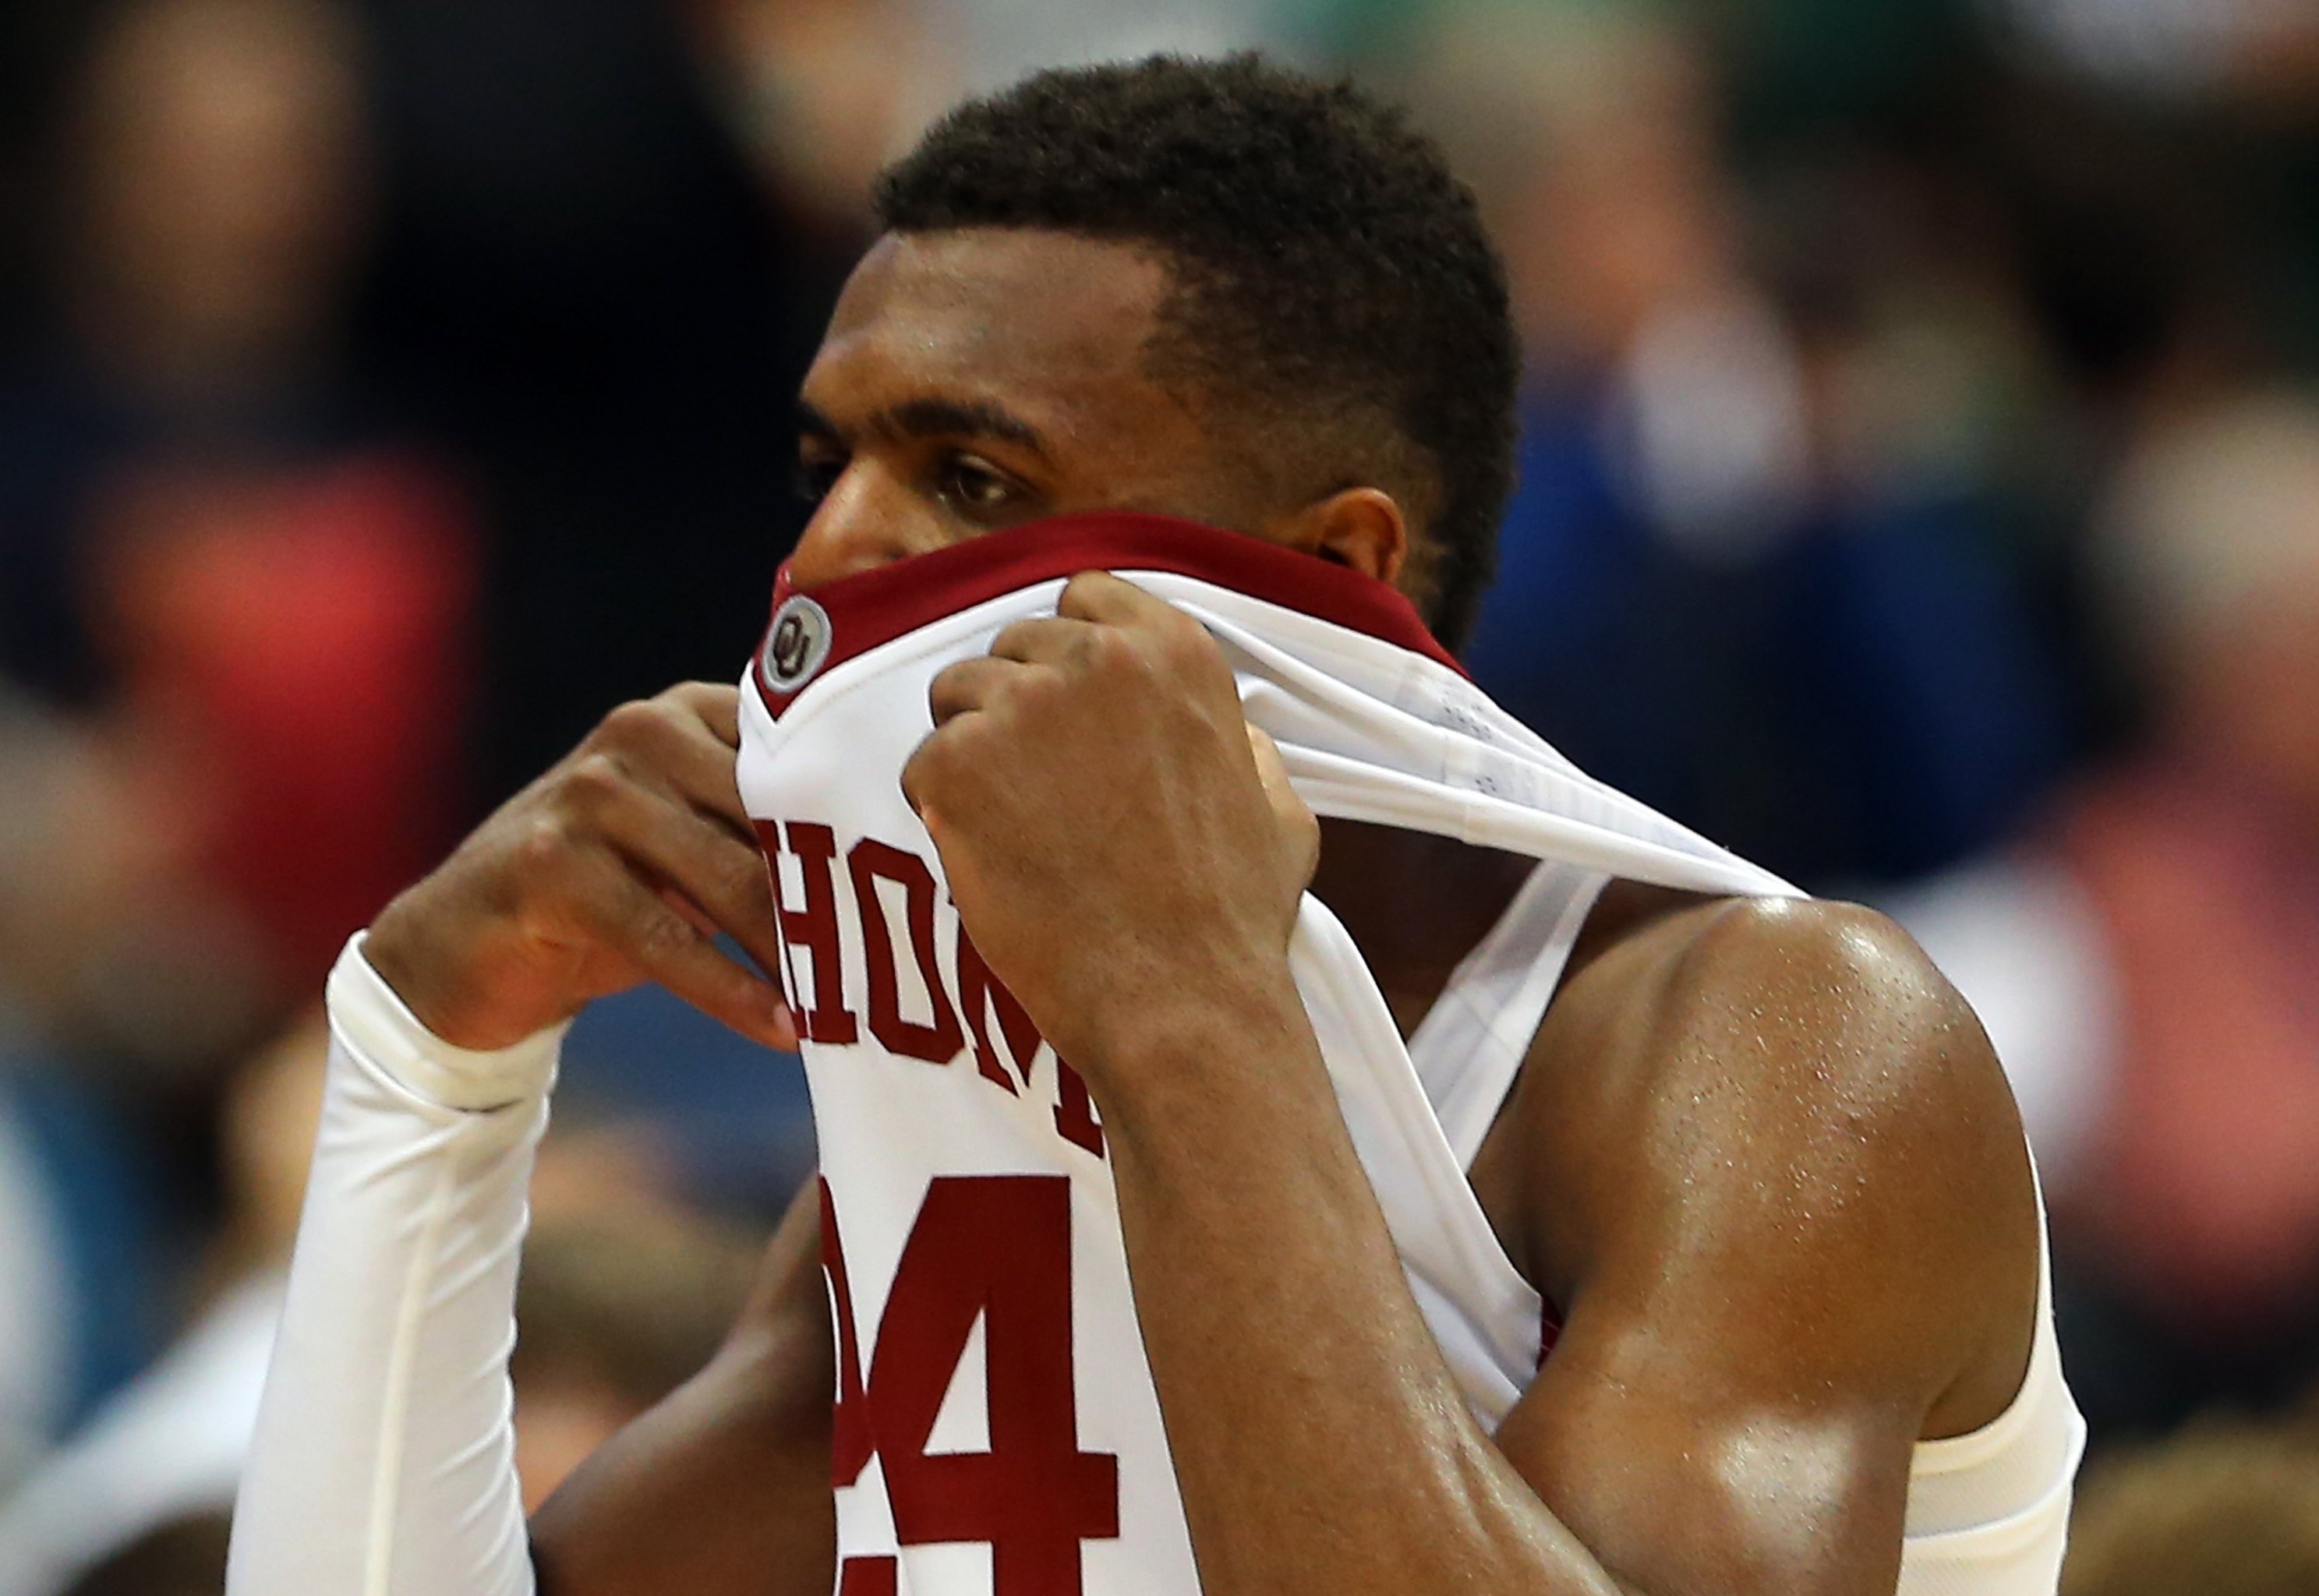 NBA's Buddy Hield thrilled to be playing for the Bahamas in